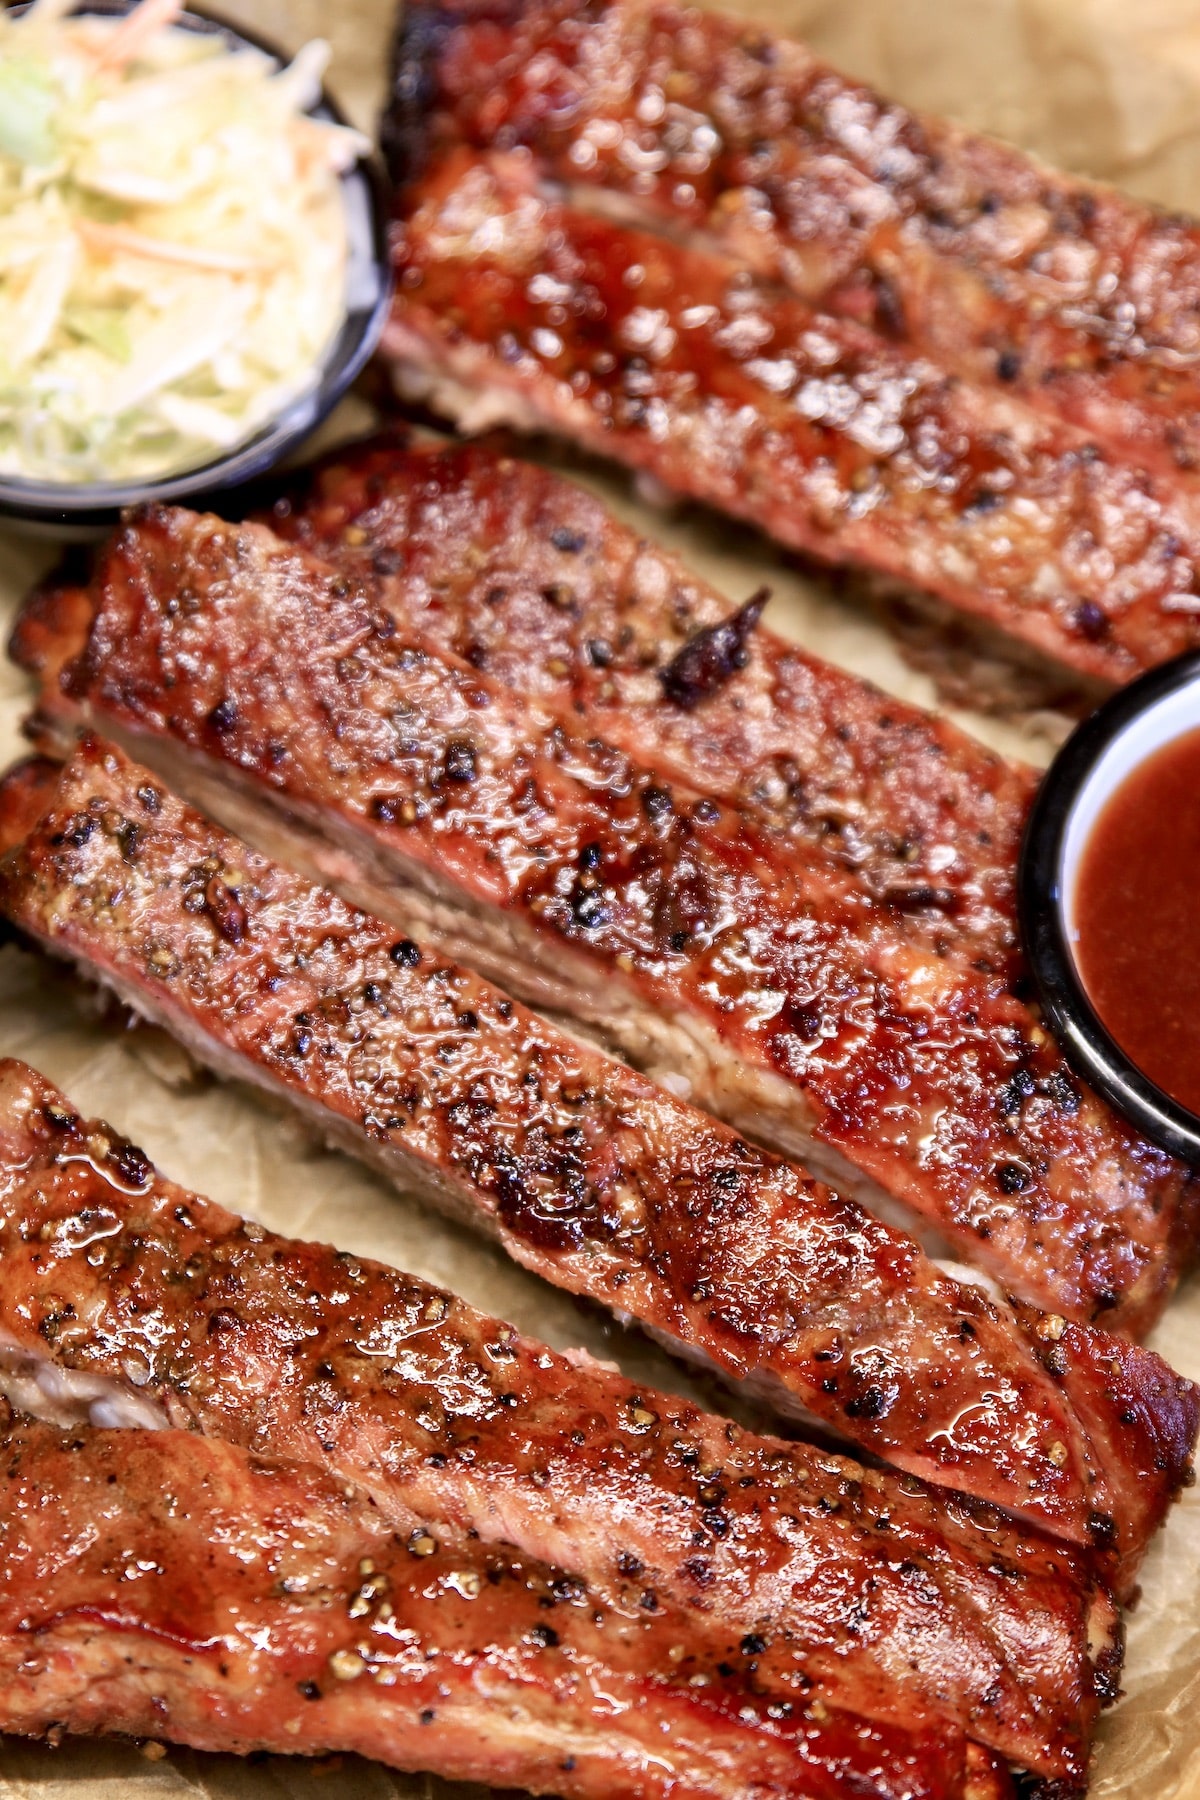 Closeup of spare ribs on a platter.